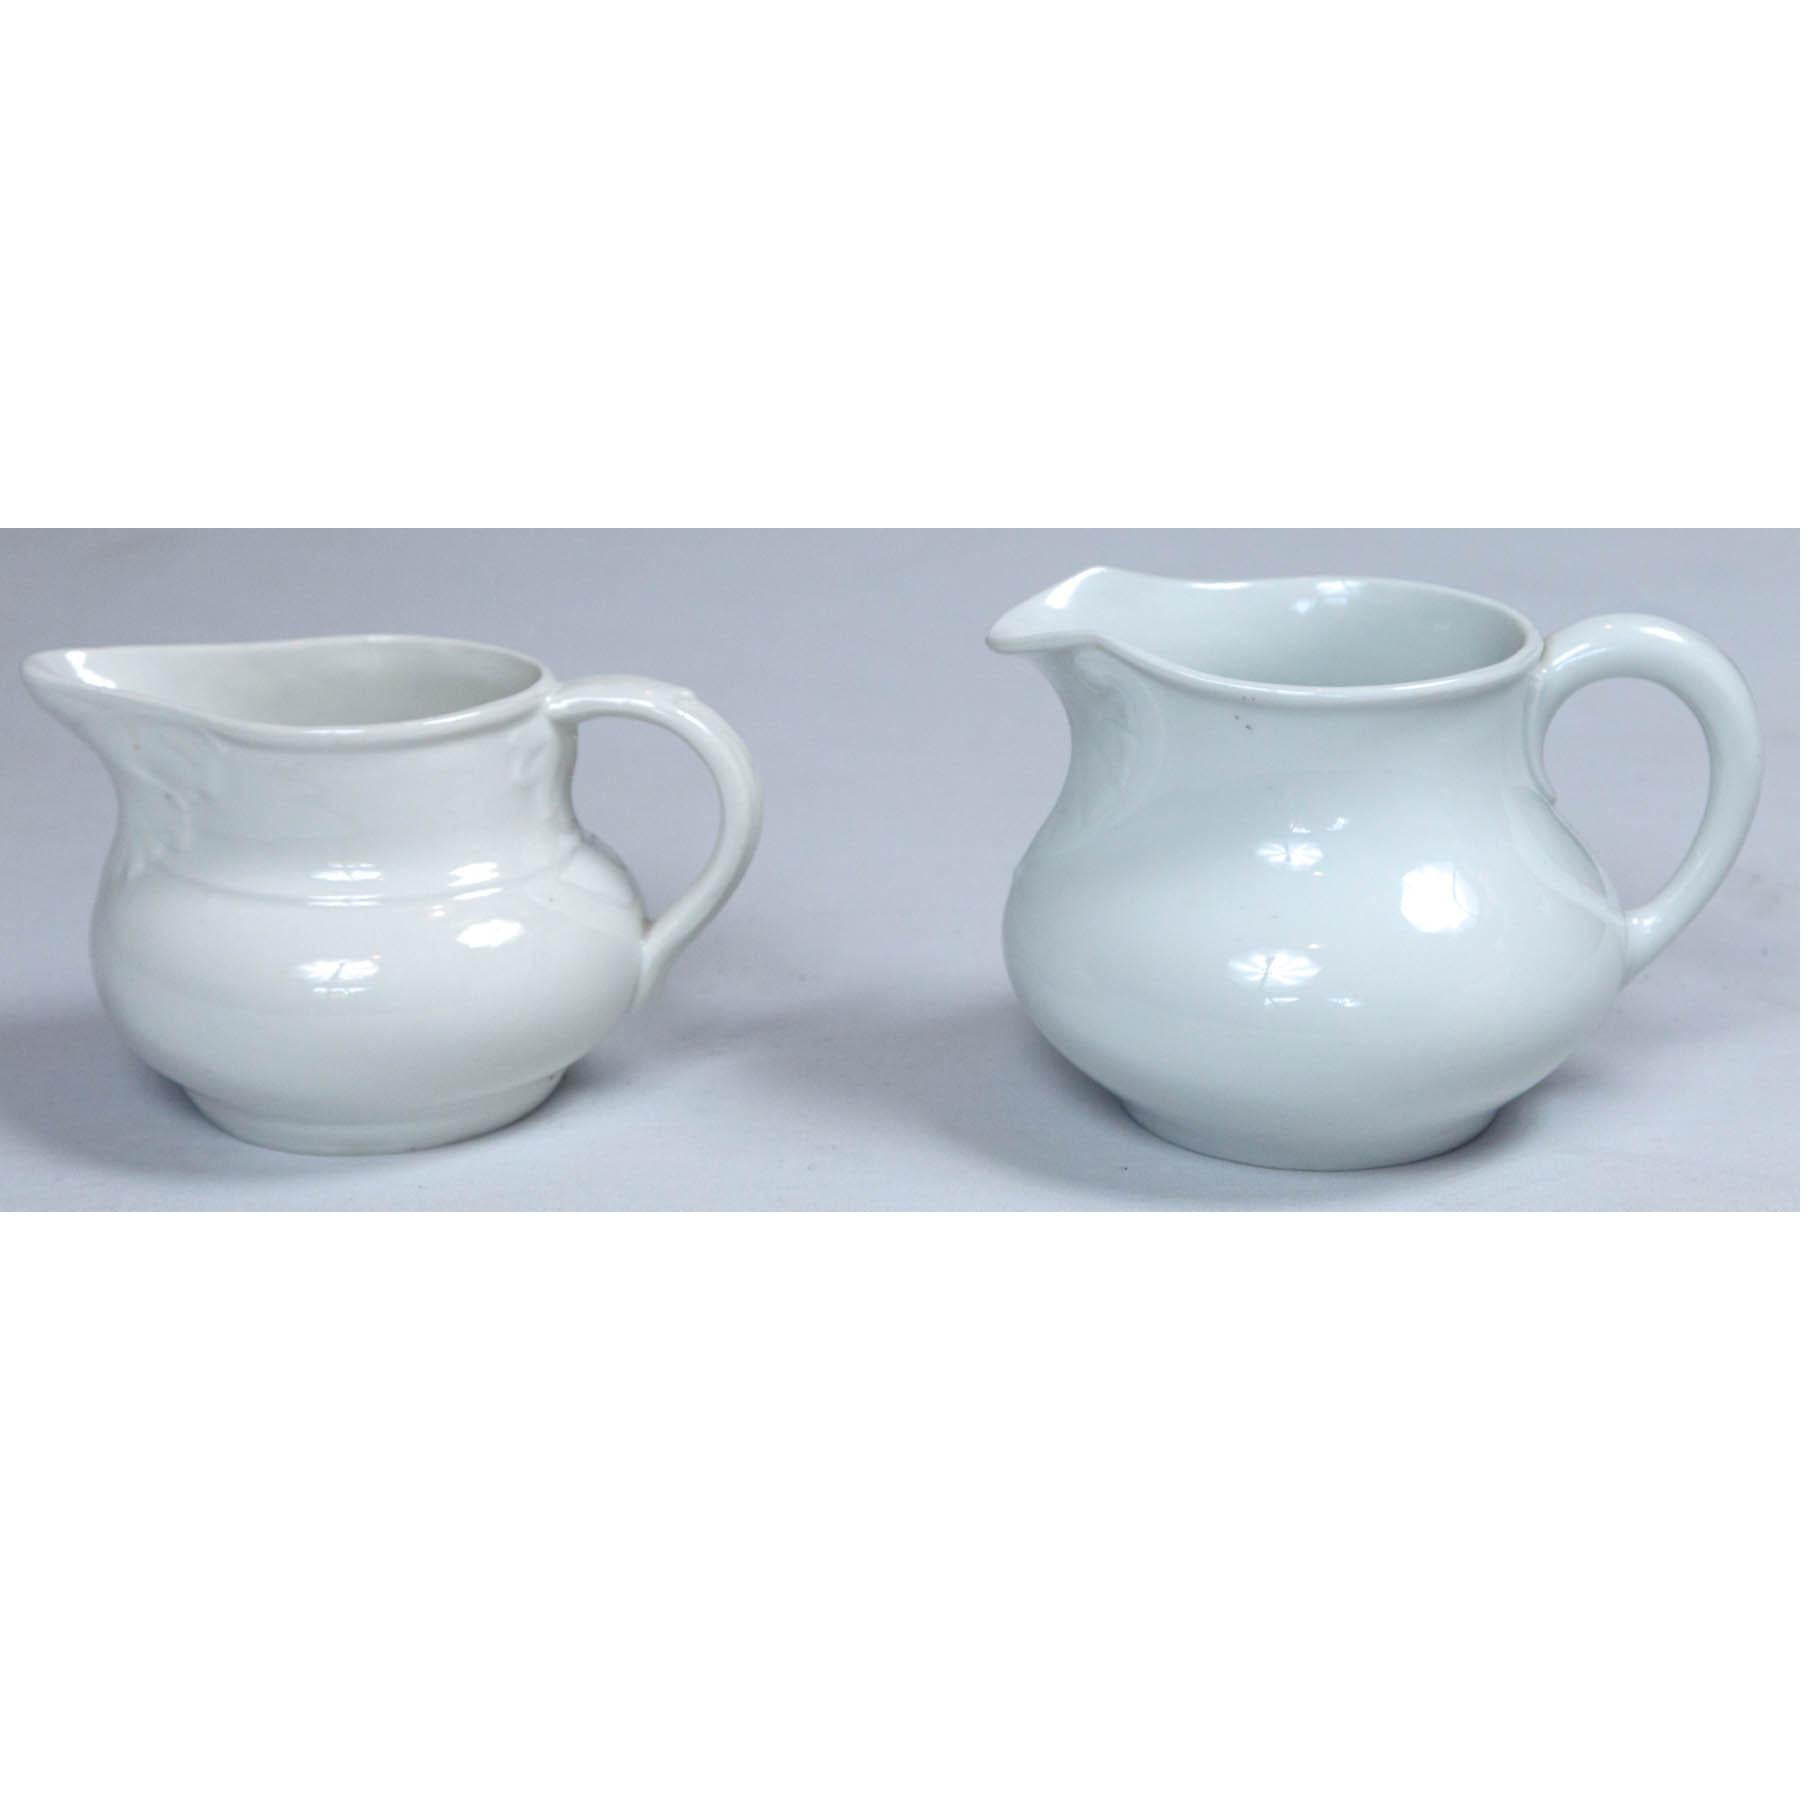 French Ironstone Dairy Pitchers, France, circa 1900